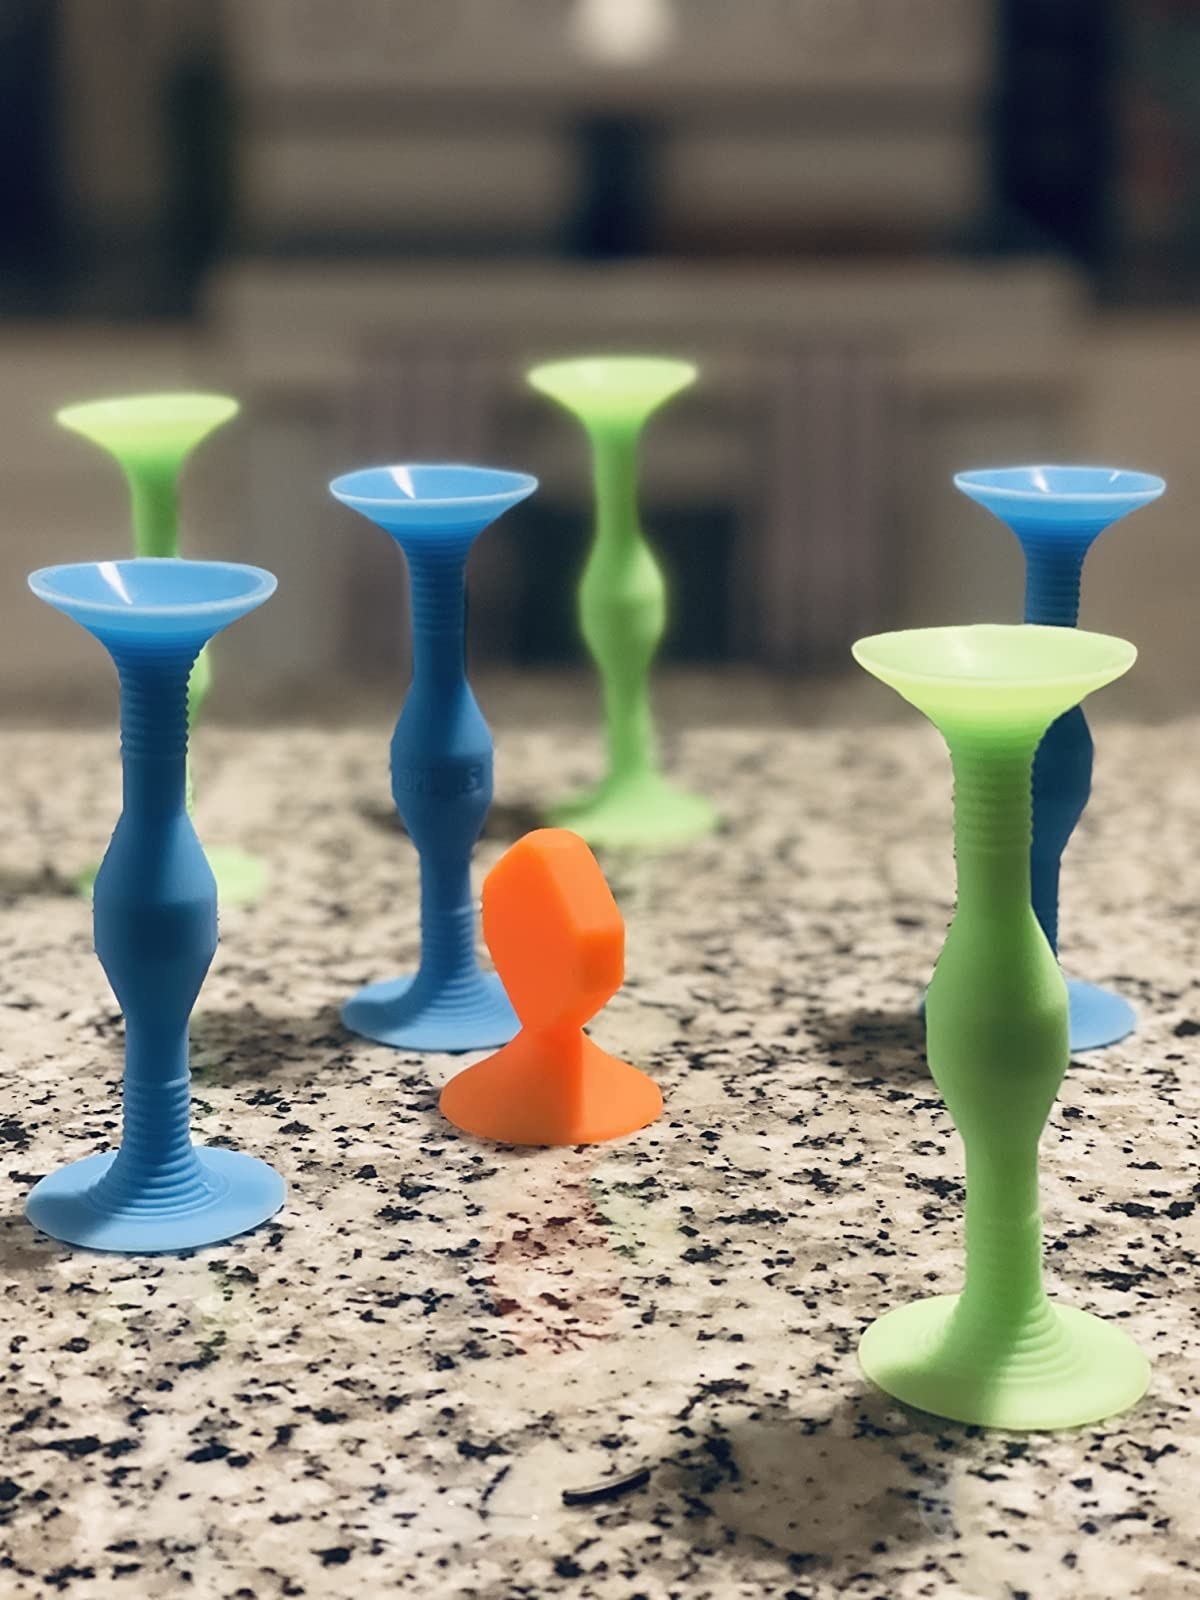 Reviewer&#x27;s image of green, blue, and orange Popdarts stuck to countertop